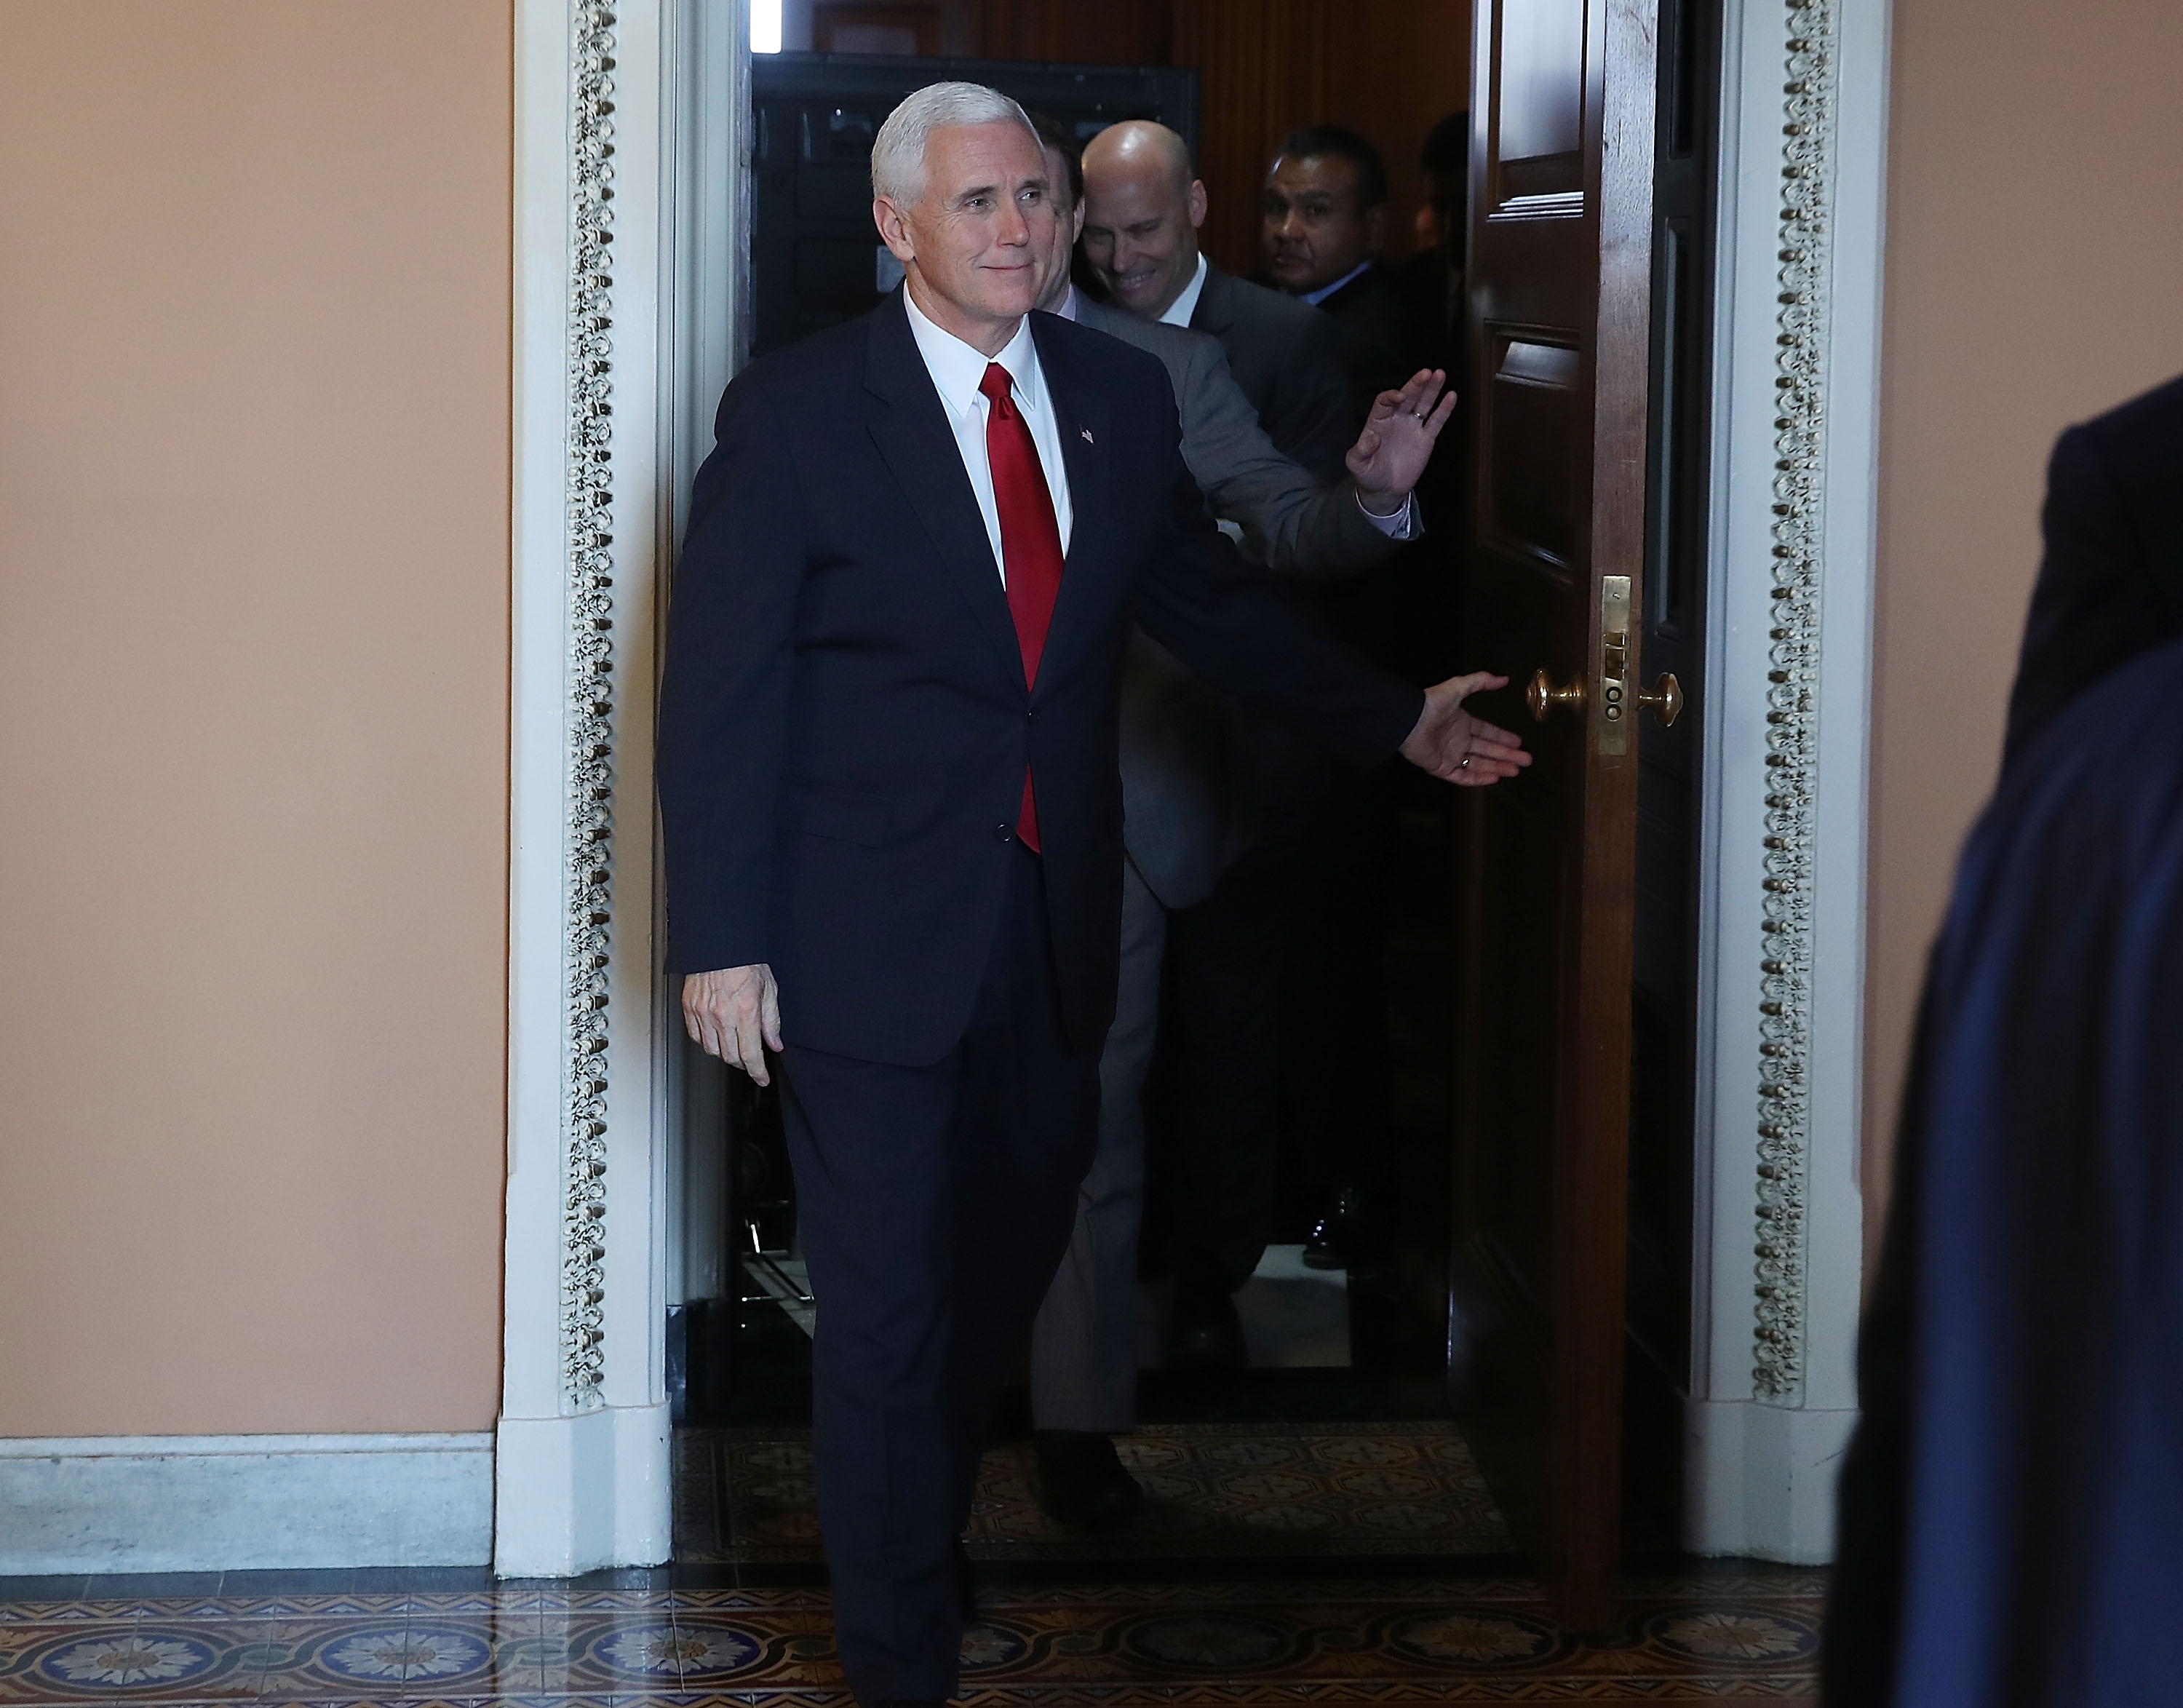 WASHINGTON, DC - MARCH 21:  U.S. Vice President Mike Pence leaves the weekly Senate Republican policy luncheon on Capitol Hill on March 21, 2017 in Washington, DC. Pence joined Senate Republicans to discuss the Senate GOP agenda.  (Photo by Mark Wilson/Getty Images) (Mark Wilson&mdash;Getty Images)